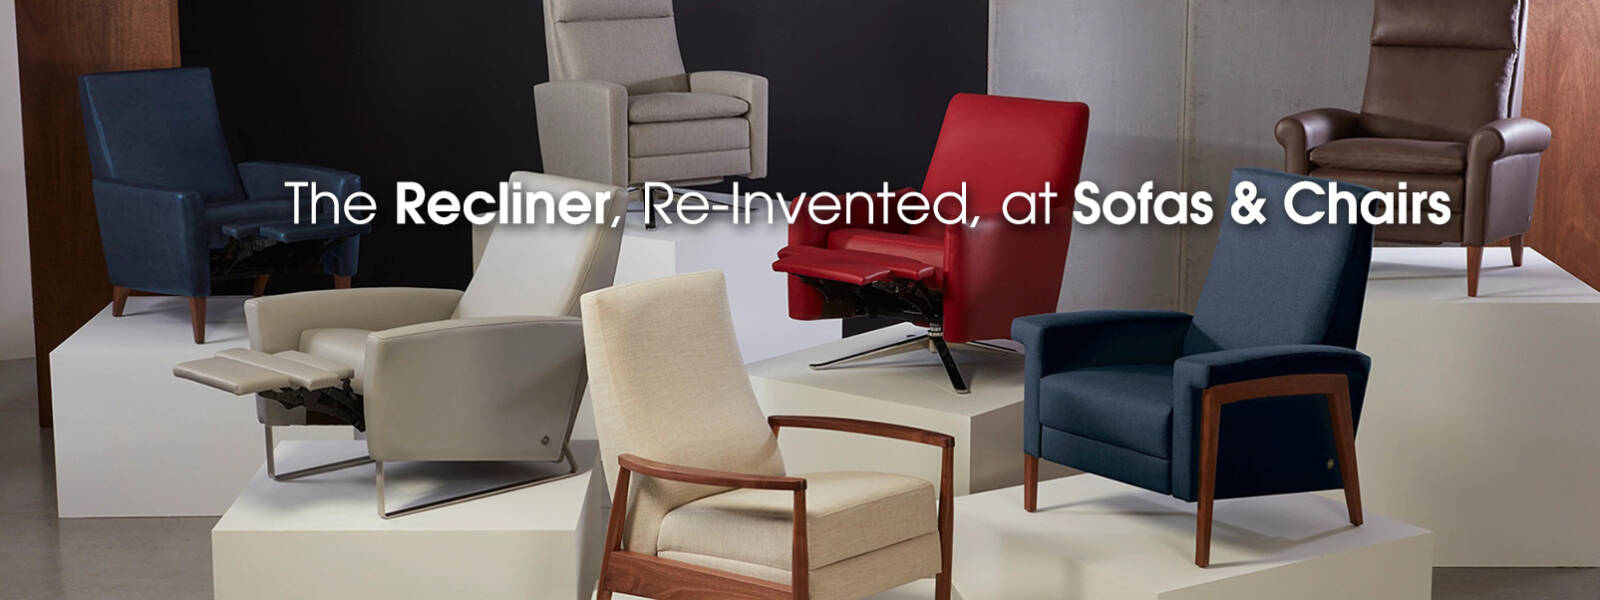 Re-Invented Recliner at Sofas & Chairs